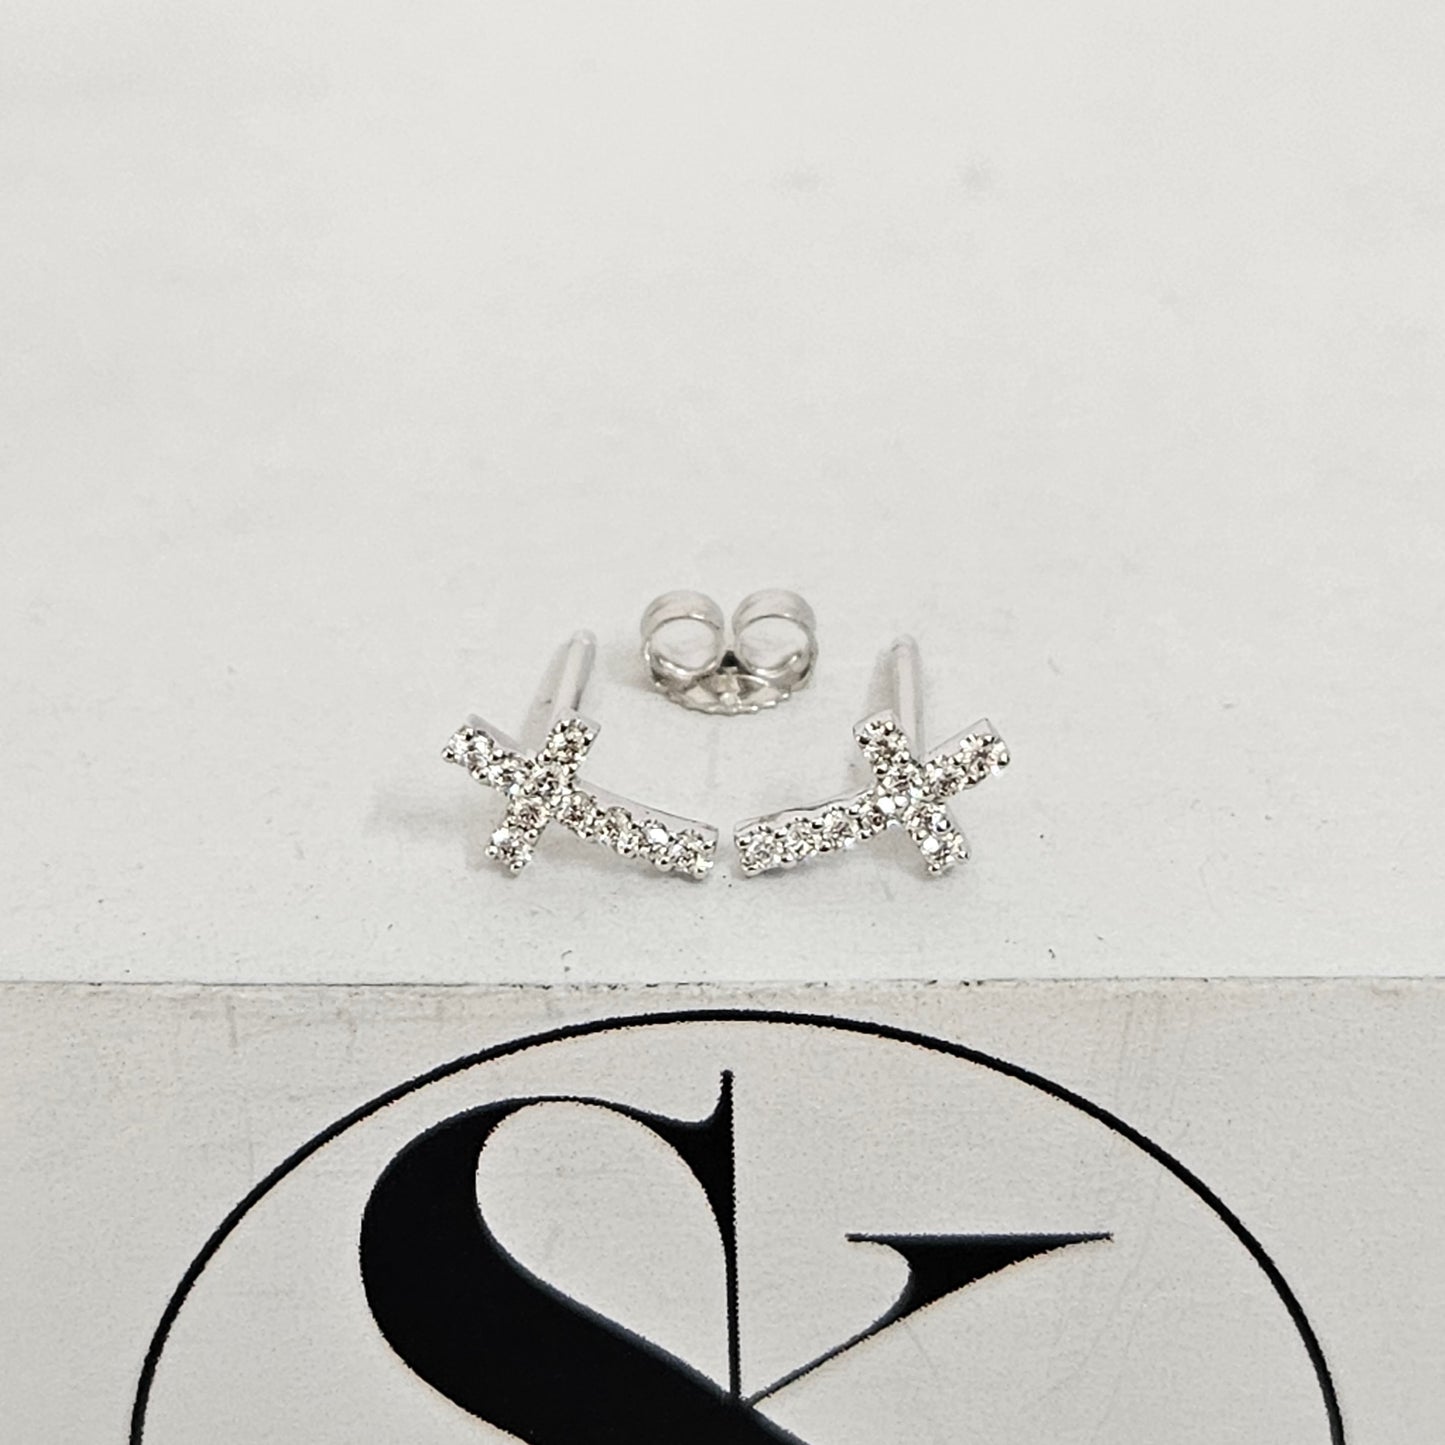 Diamond Cross Earrings/14k Diamond Cross Earring/ Dainty Earrings/ Tiny Cross Earring/ Diamond Cross Stud/ For Pai / Gifts for her